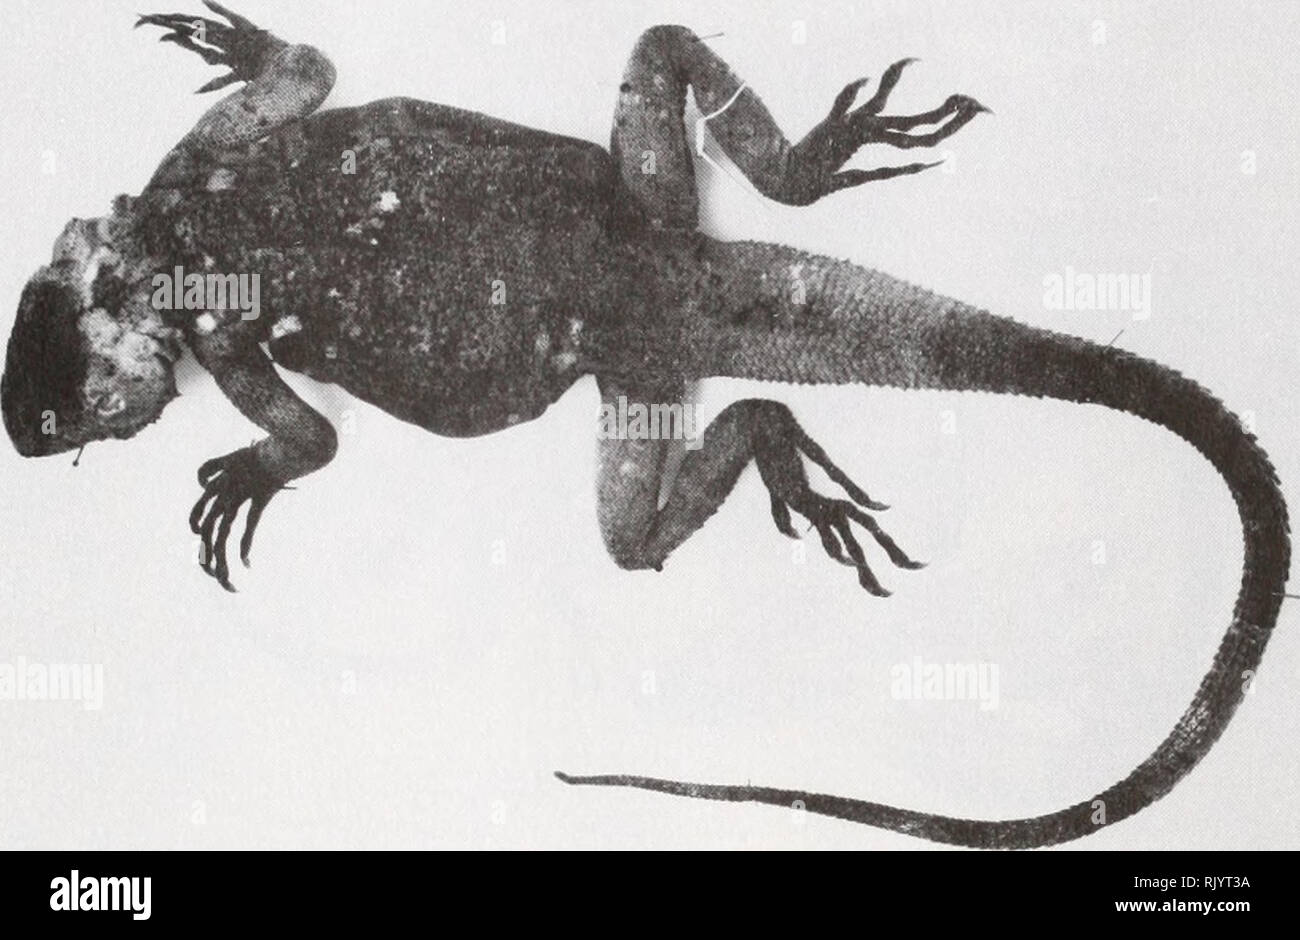 . Asiatic herpetological research. Reptiles -- Asia Periodicals; Amphibians -- Asia Periodicals. April 1990 Asiatic Herpetological Research Vol. 3, p. 105. FIG. 1. Lectotype of Stellio sacra BMNH 1946.8.28.57 (formerly 1904.12.28.1). Sera Monastery, Lhasa (29° 39'N 91° 06' E), Lhasa Municipality, Xizang (Tibet) Autonomous Region, China. Collected by: T. J. Papenfuss and R. Macey. Date: 24 Sept., 1988. CAS 170546-53. Locality: Elev. 3700 m, at base of mountains approx. 3 km WNW (airline) of the Potala Palace, Lhasa (29° 39'N 91° 06'E), Lhasa Municipality, Xizang (Tibet) Autonomous Region, China Stock Photo